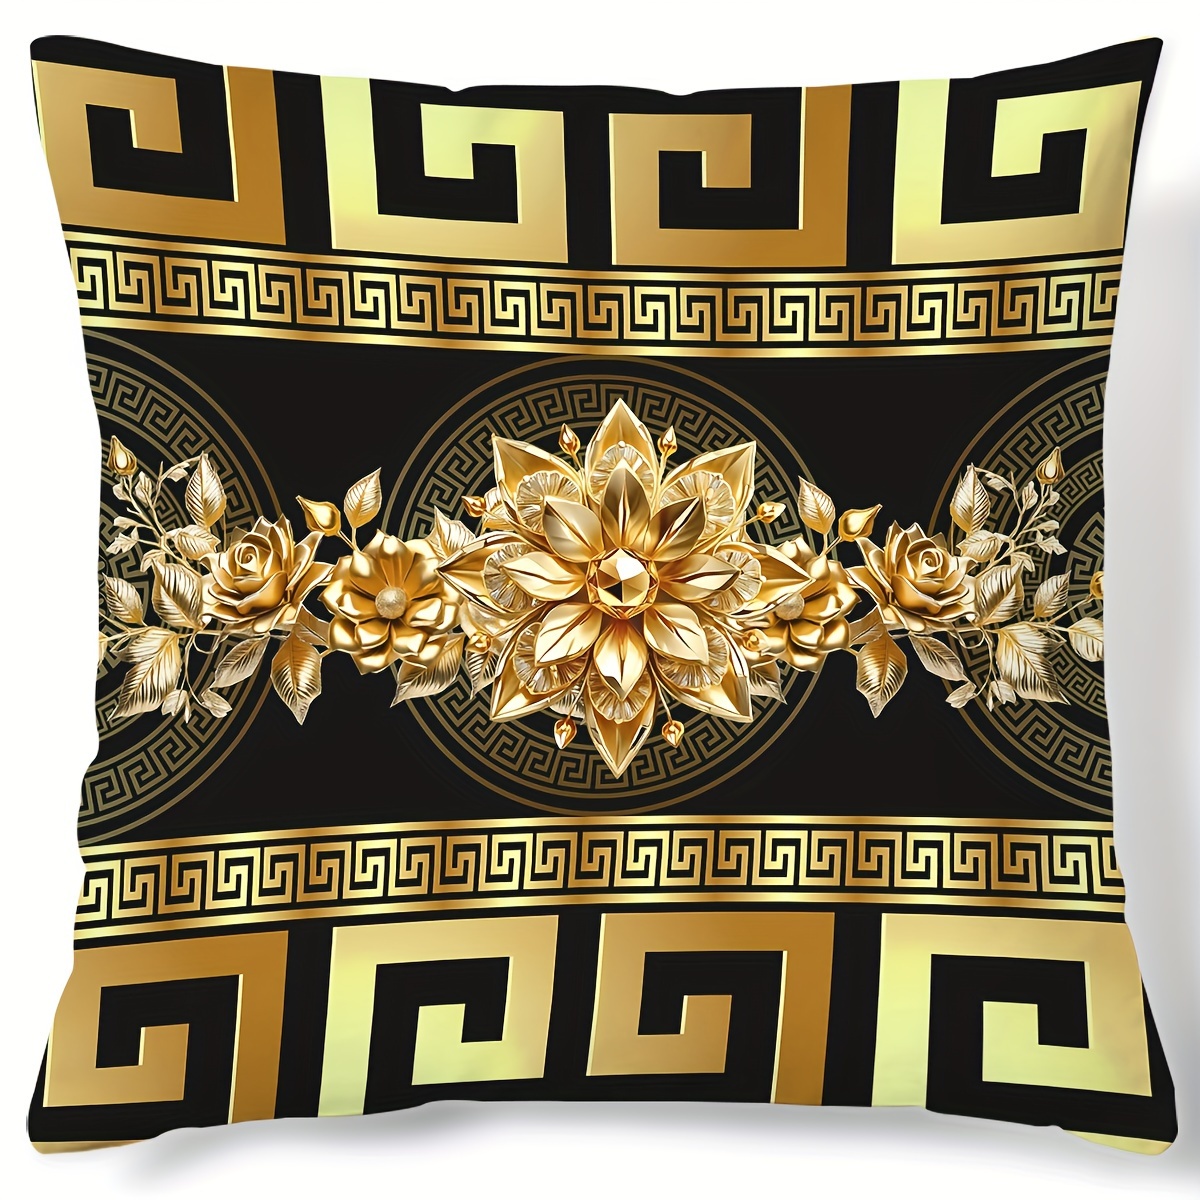 

Contemporary Throw Pillow Cover With Golden Floral And Greek Key Design - 17.7x17.7 Inch Decorative Pillowcase, Single-sided Digital Print, Polyester, Zipper Closure For Sofa And Home Decor (1pc)